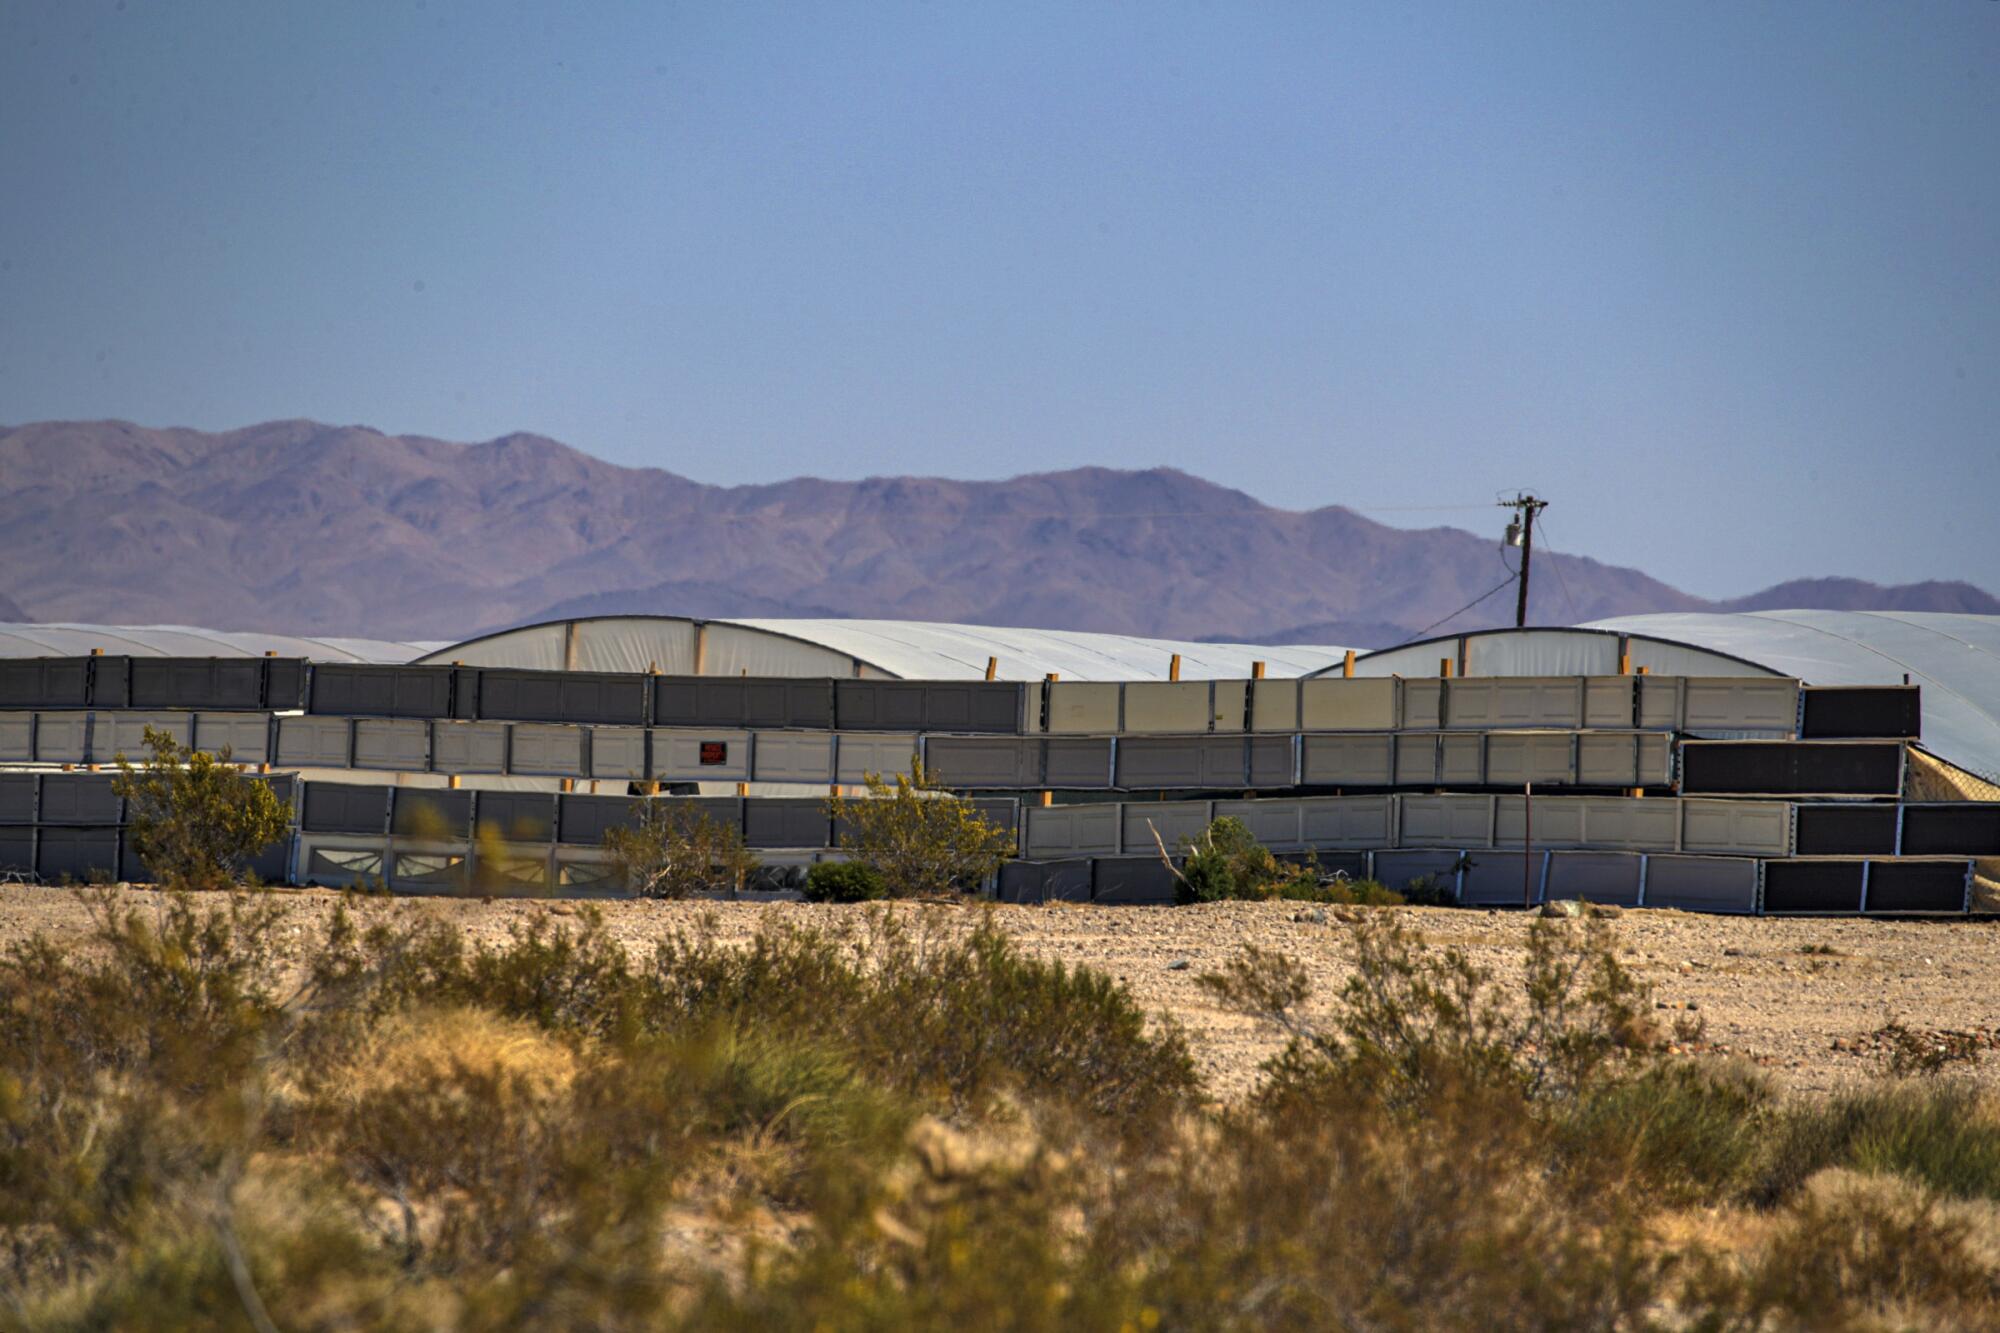 These structures were identified by a resident as part of an illegal pot farm in Joshua Tree.